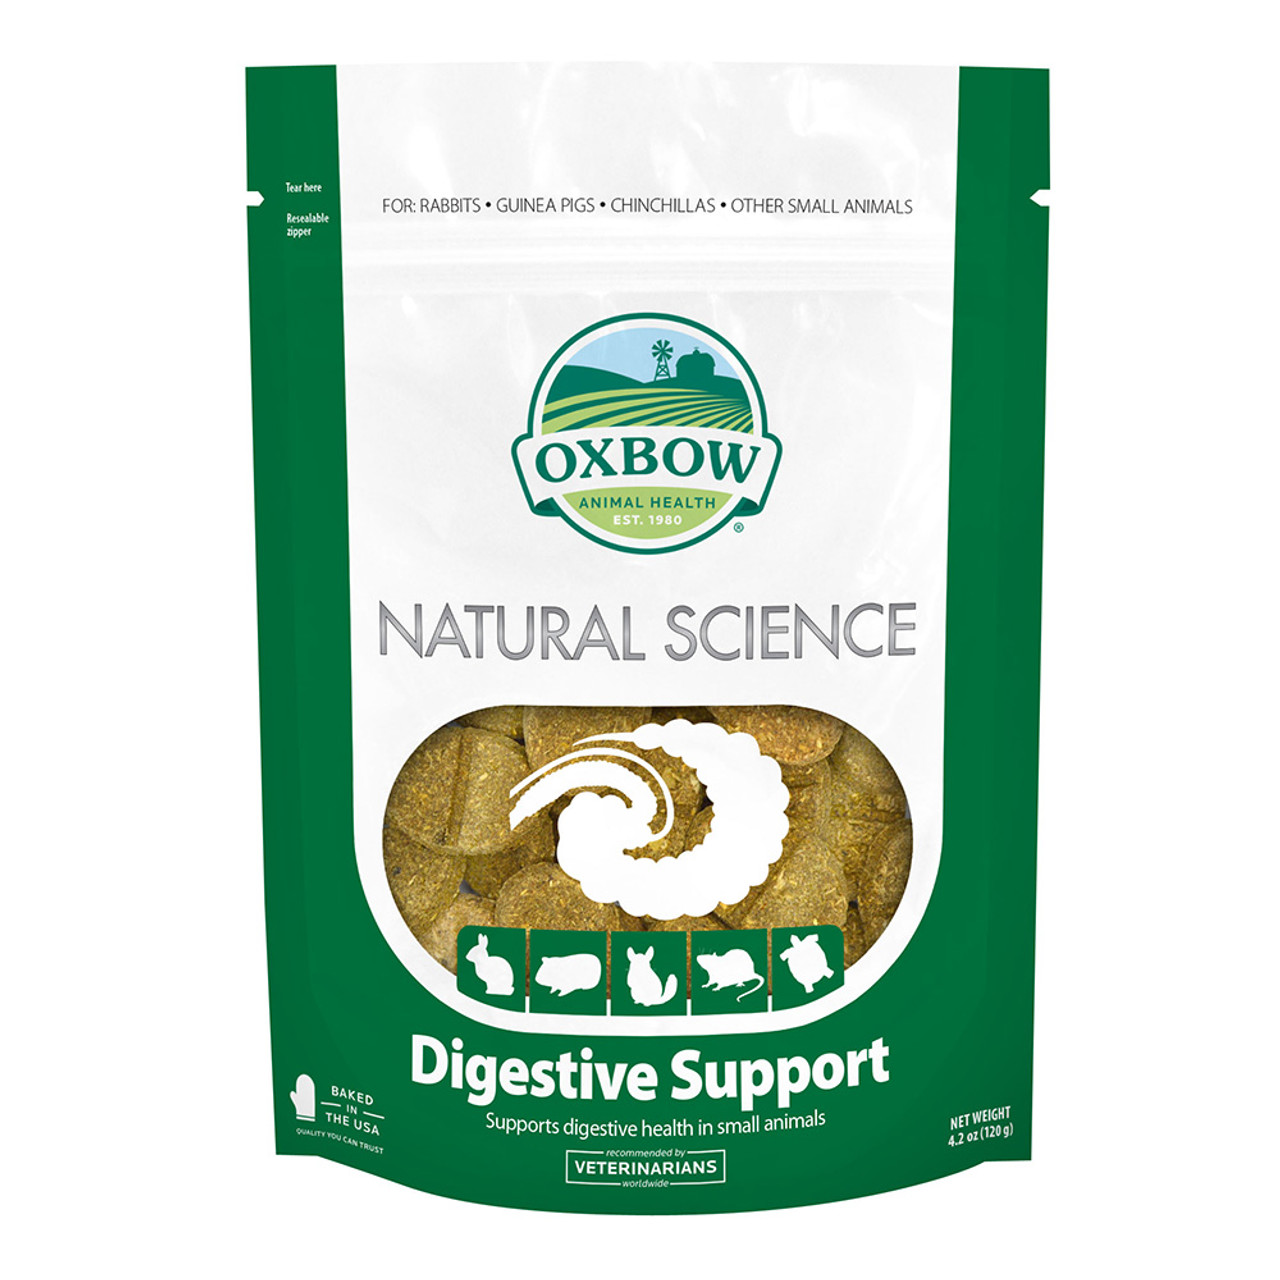 How To Provide Nutritional Enrichment For Small Pets - Oxbow Animal Health